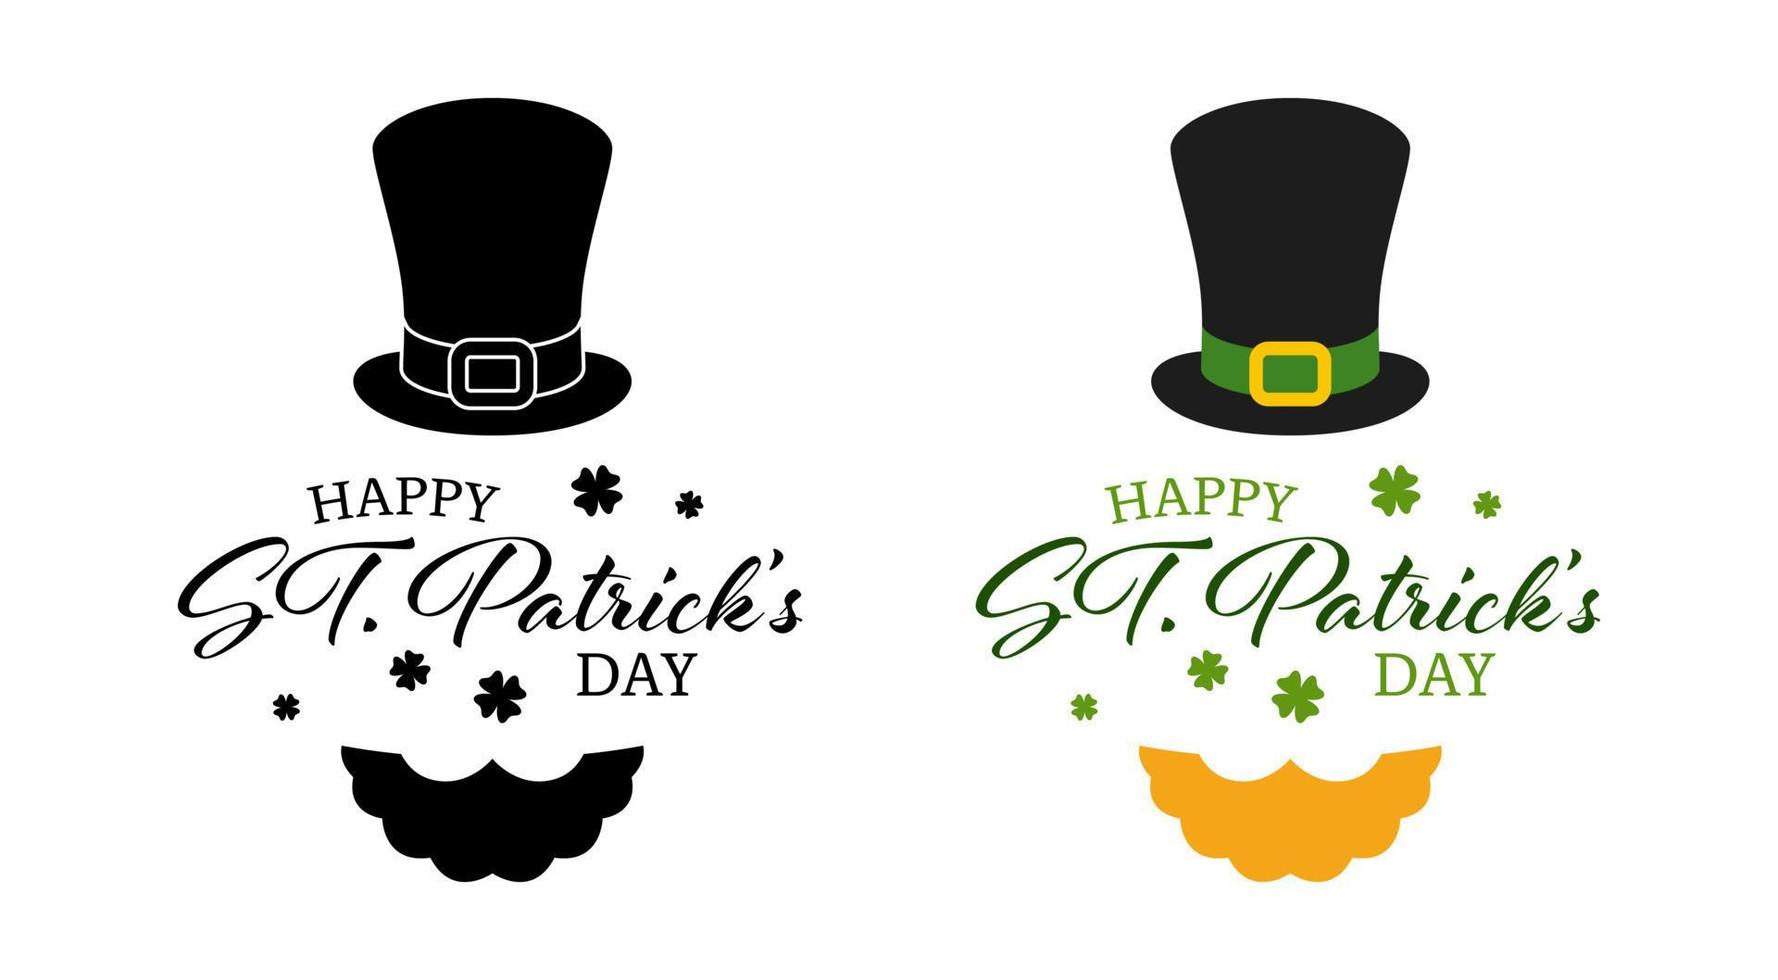 Saint Patrick Day banner isolated on white background vector